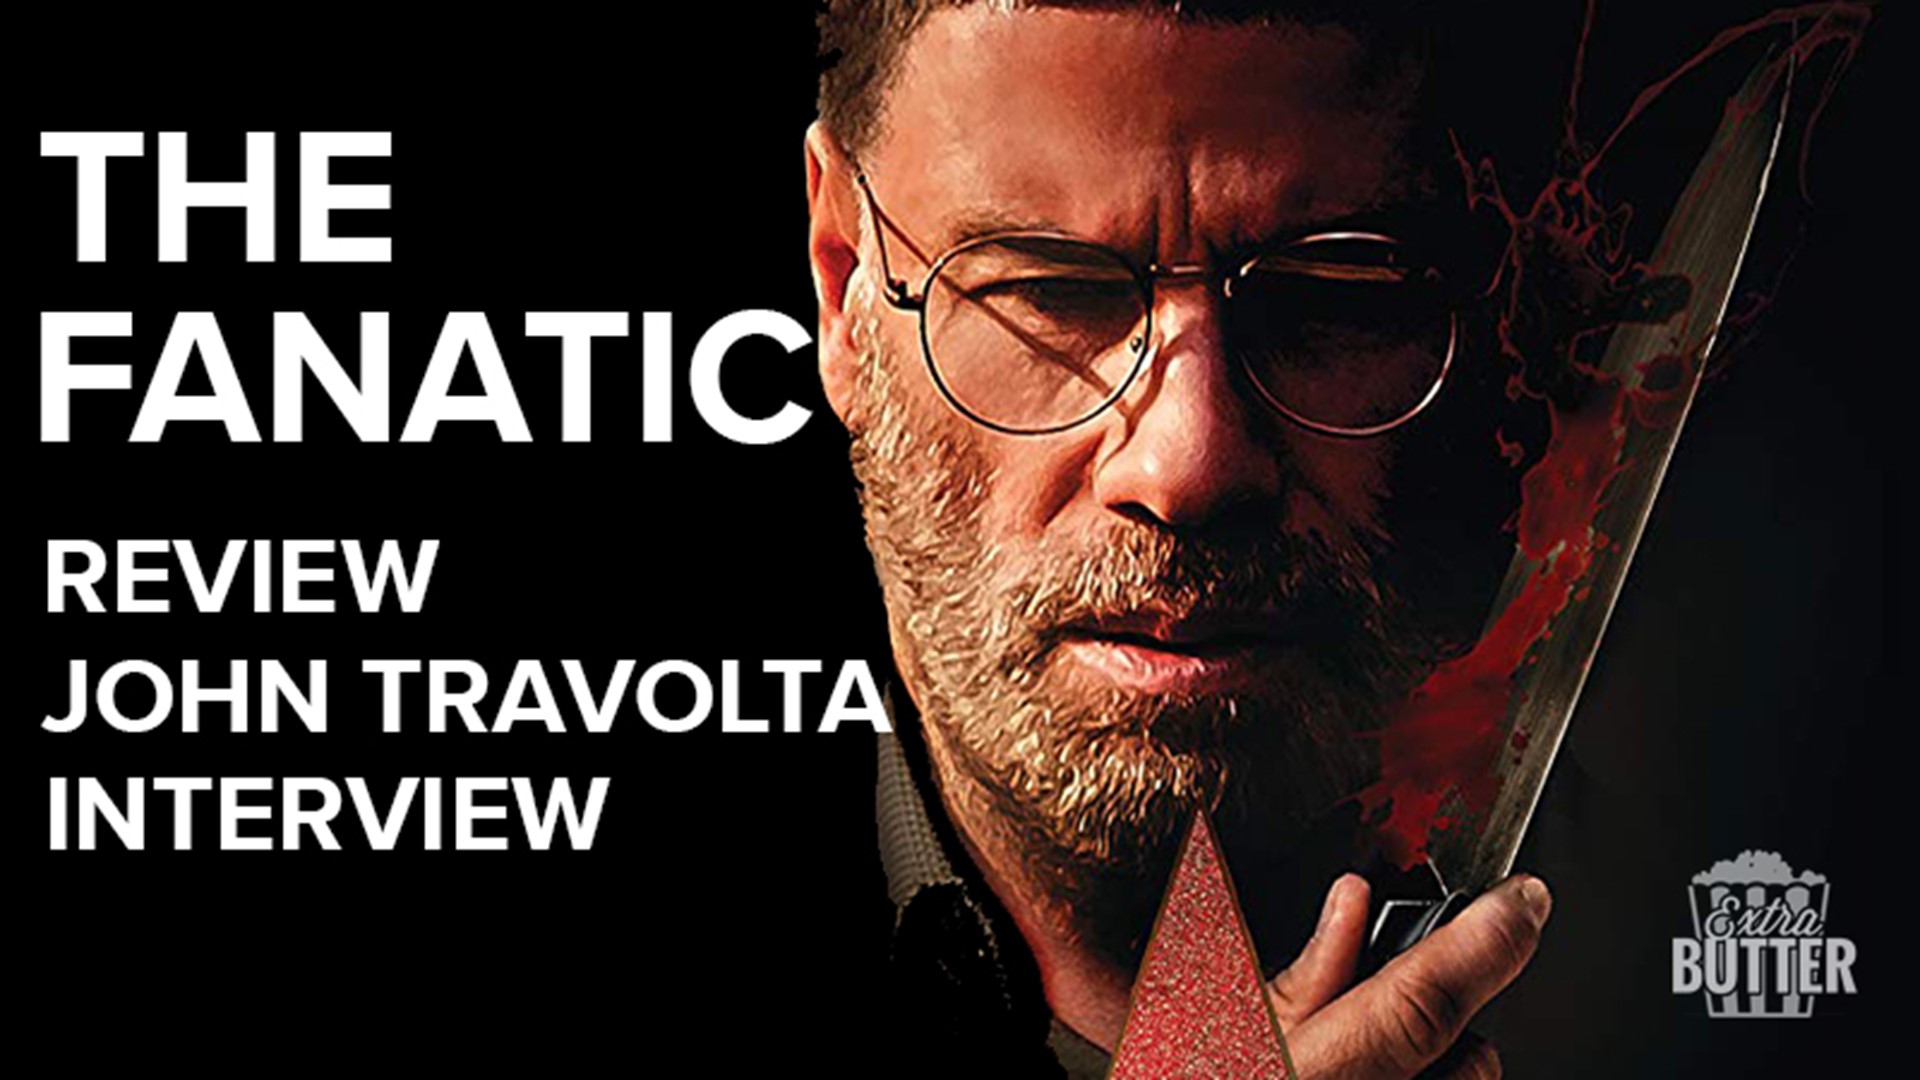 It’s John Travolta as you’ve never seen him before. Extra Butter reviews Travolta’s creepy turn in ‘The Fanatic.’ Mark S. Allen also interview John Travolta about his own interactions with fans.